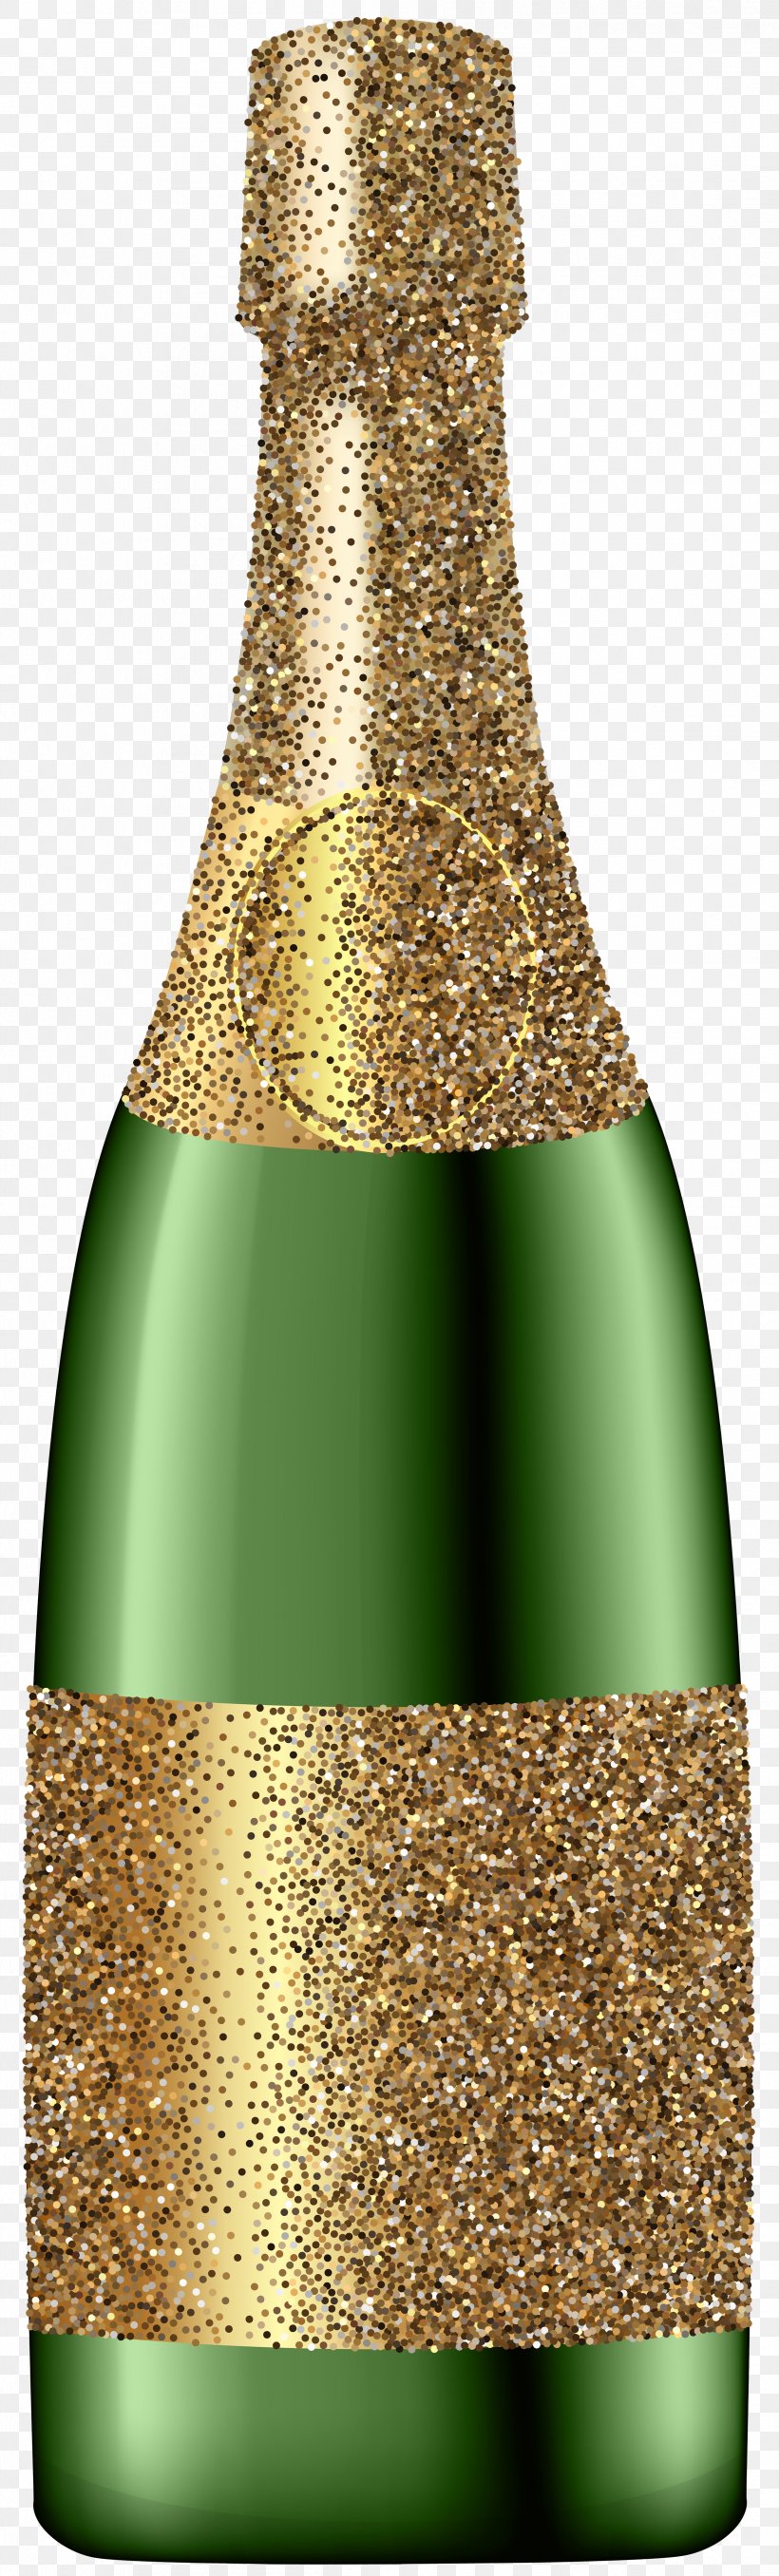 Red Wine Champagne Bottle Clip Art, PNG, 2418x8000px, Champagne, Beer Bottle, Bottle, Champagne Glass, Commodity Download Free